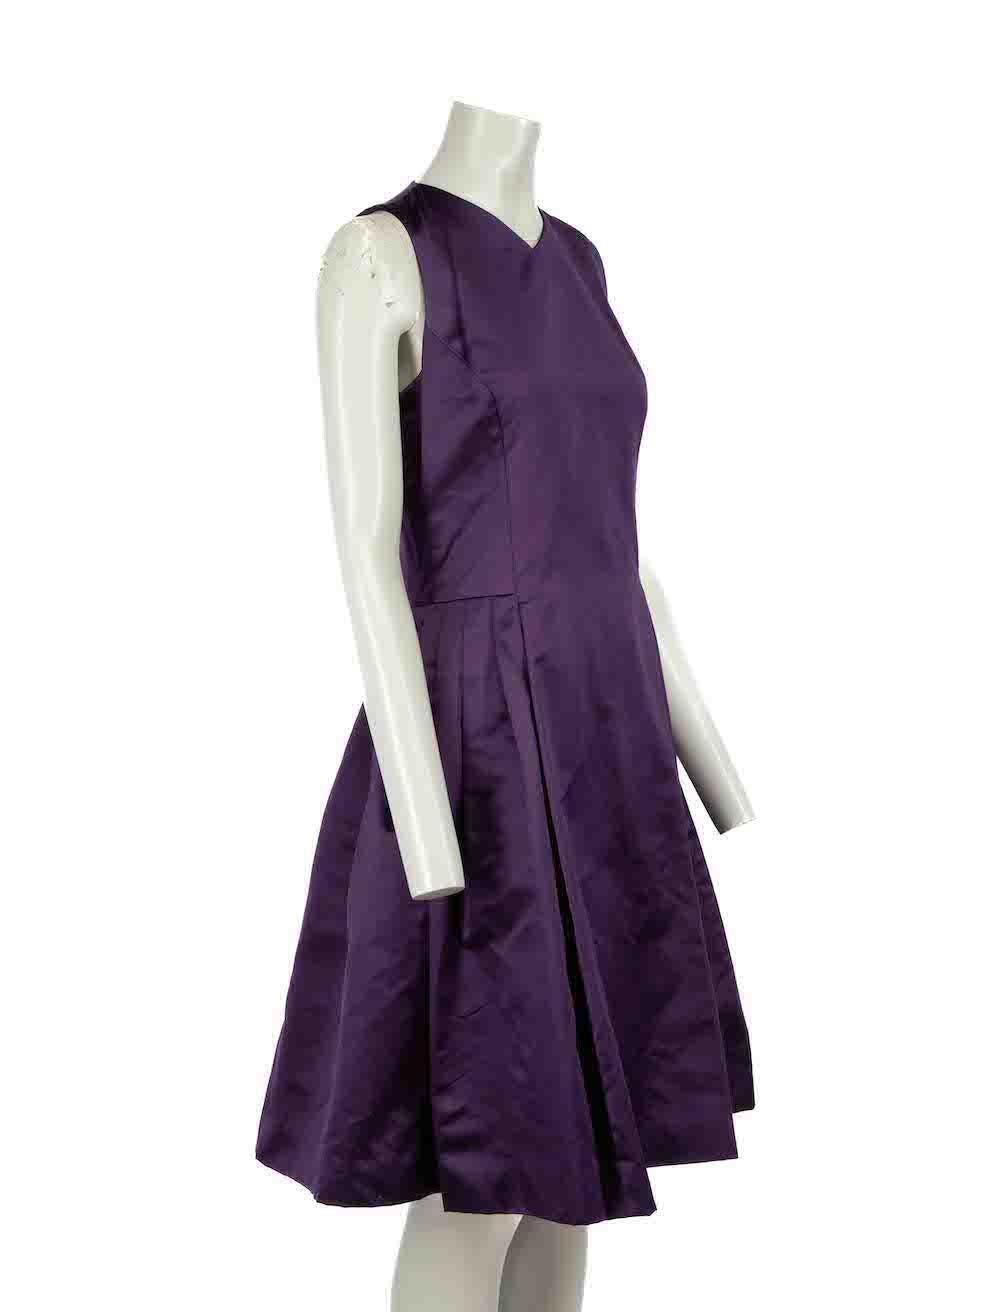 CONDITION is Good. General wear to dress is evident. Moderate signs of wear to the underarms with slight discolouration and multiple pulls to the weave on the front on this used Ralph Lauren designer resale item.
 
Details
Purple
Silk
Dress
Knee